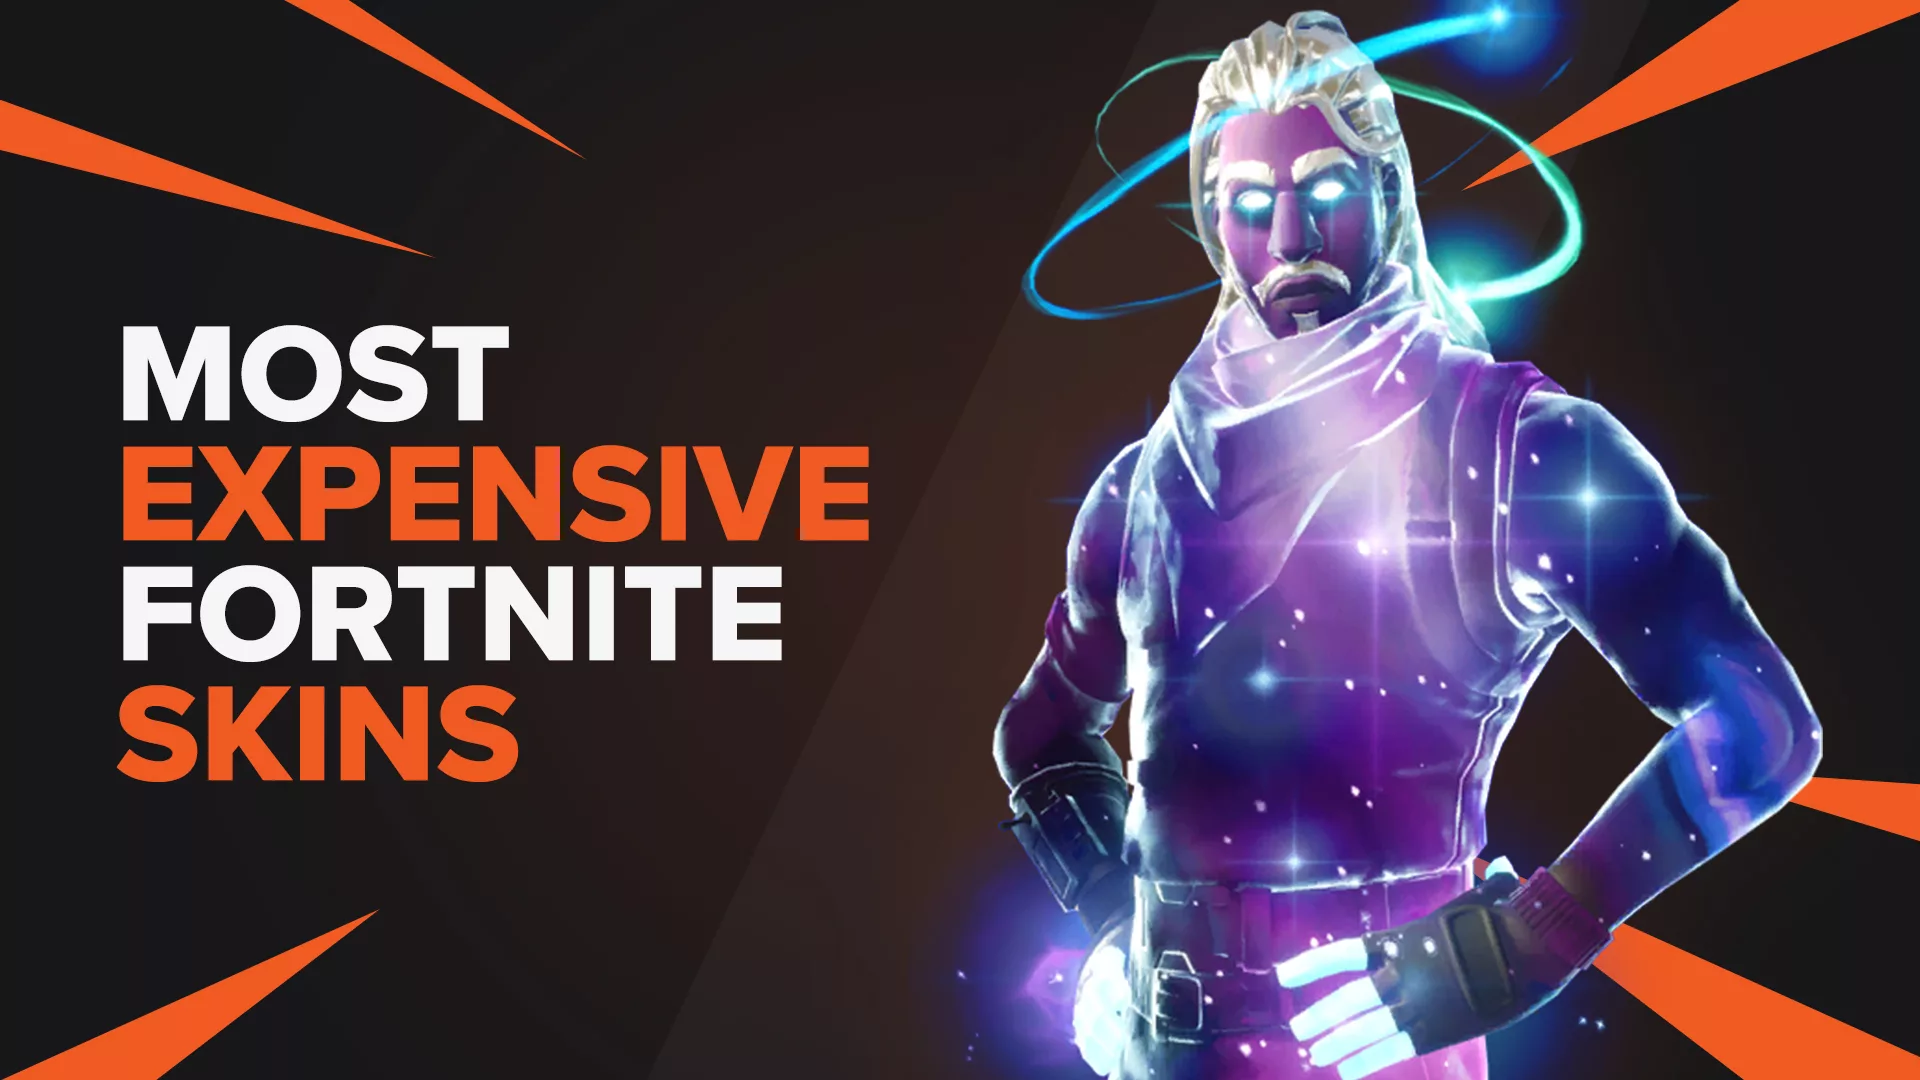 The 10 Most Expensive Fortnite Skins